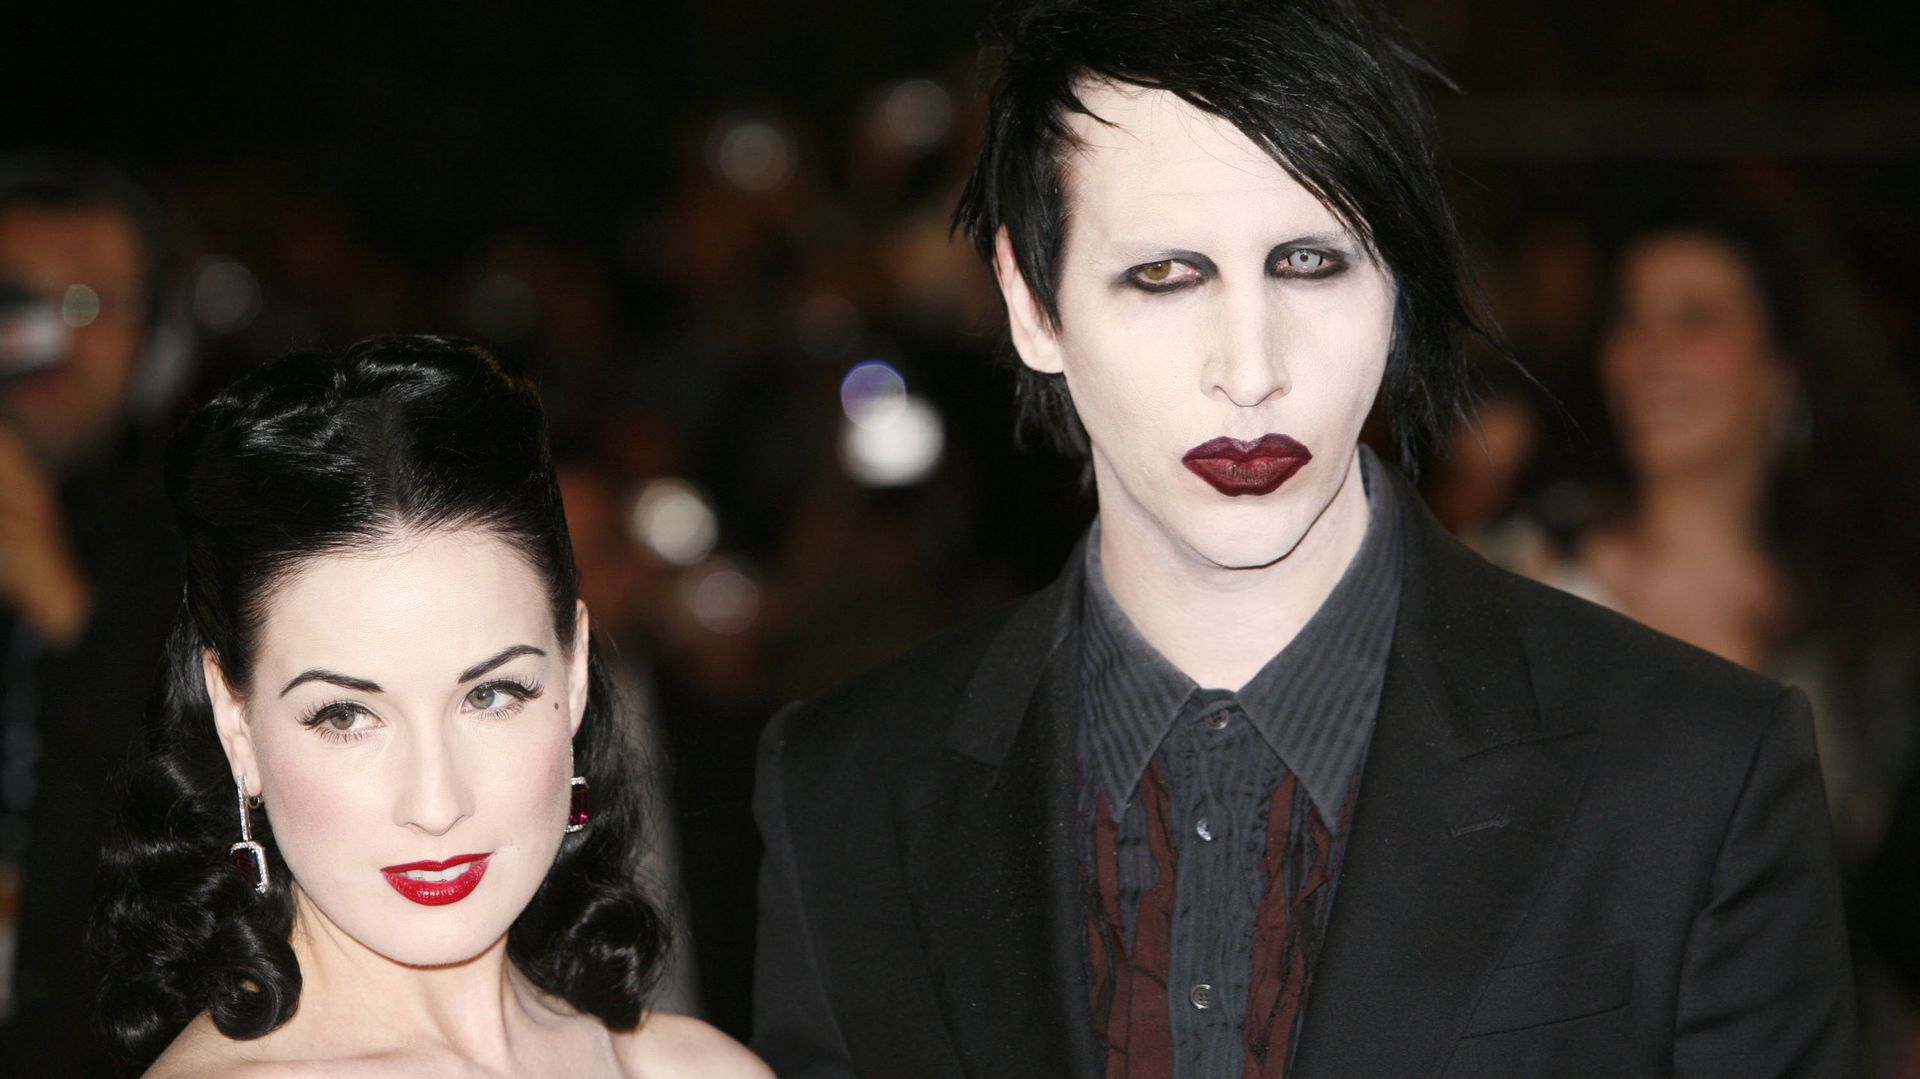 Dita Von Teese and Marilyn Manson during 2006 Cannes Film Festival – "Southland Tales" Premiere at Palais des Festival in Cannes, France. (Photo by Richard Lewis/WireImage)